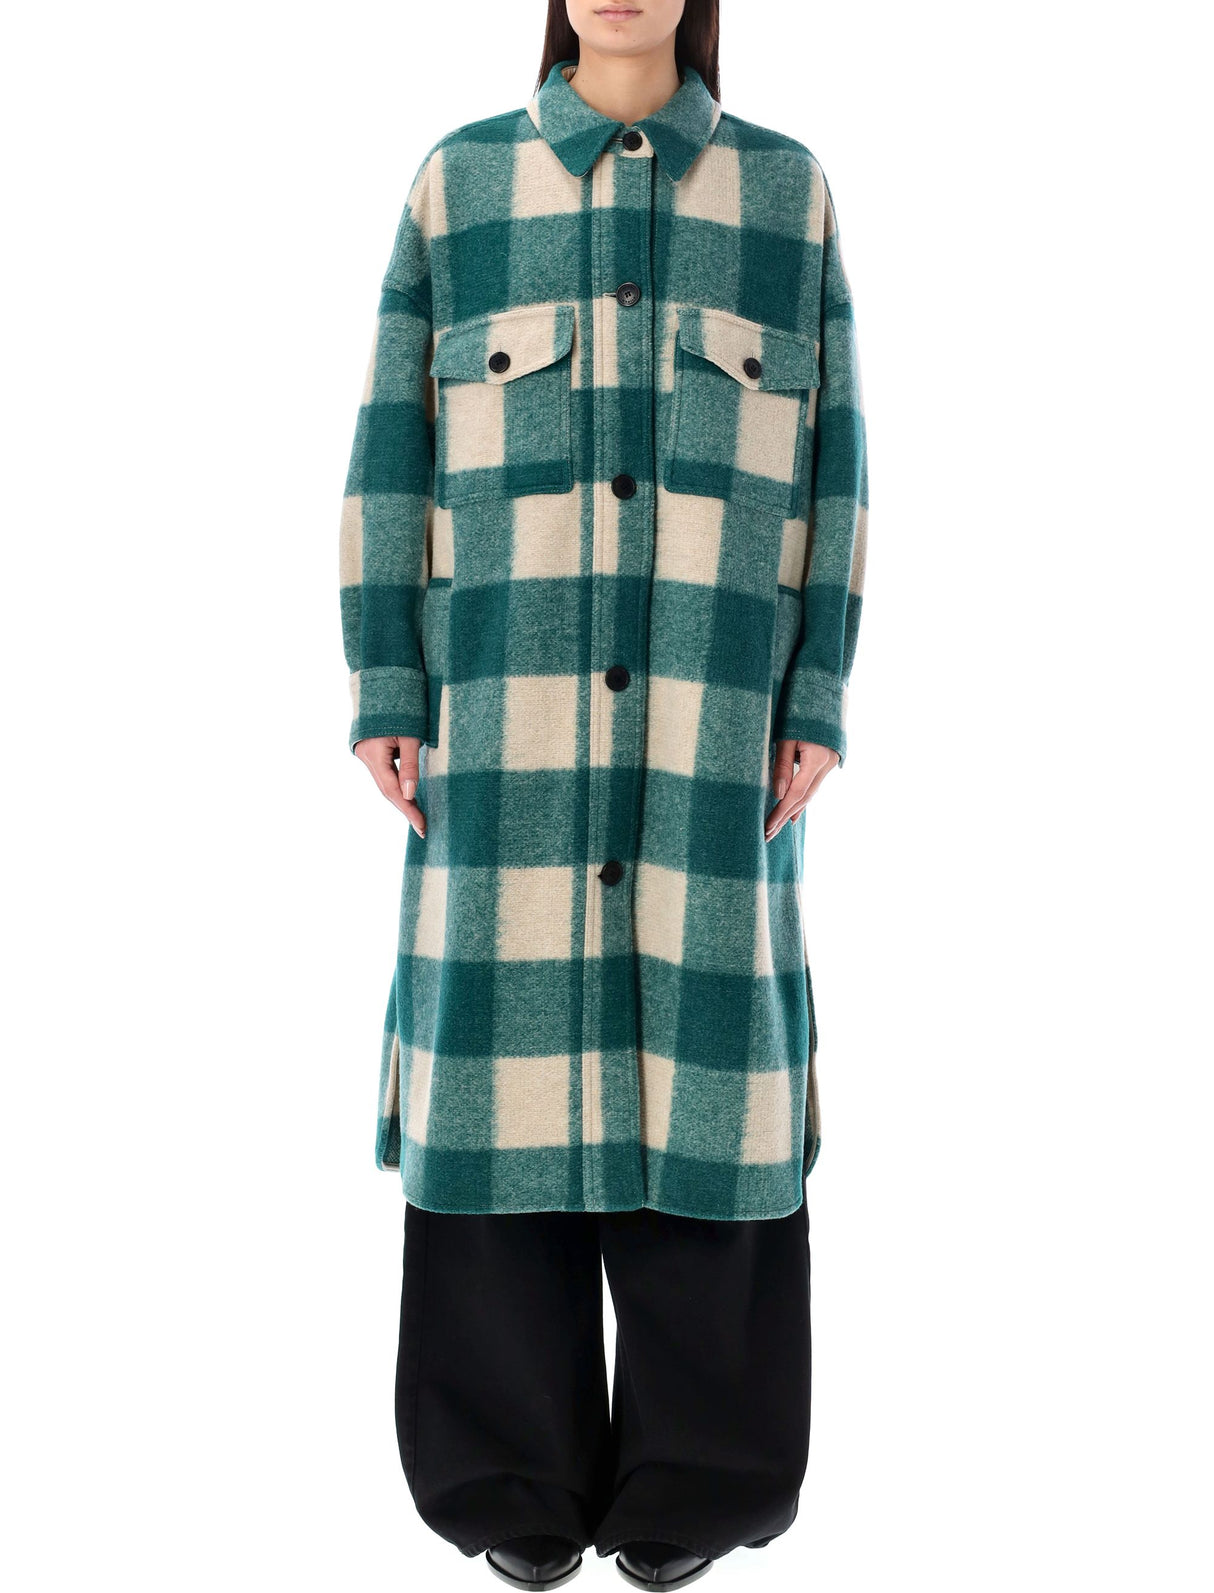 ISABEL MARANT ETOILE Green Check Motif Wool Blend Jacket for Women - SS24 Collection